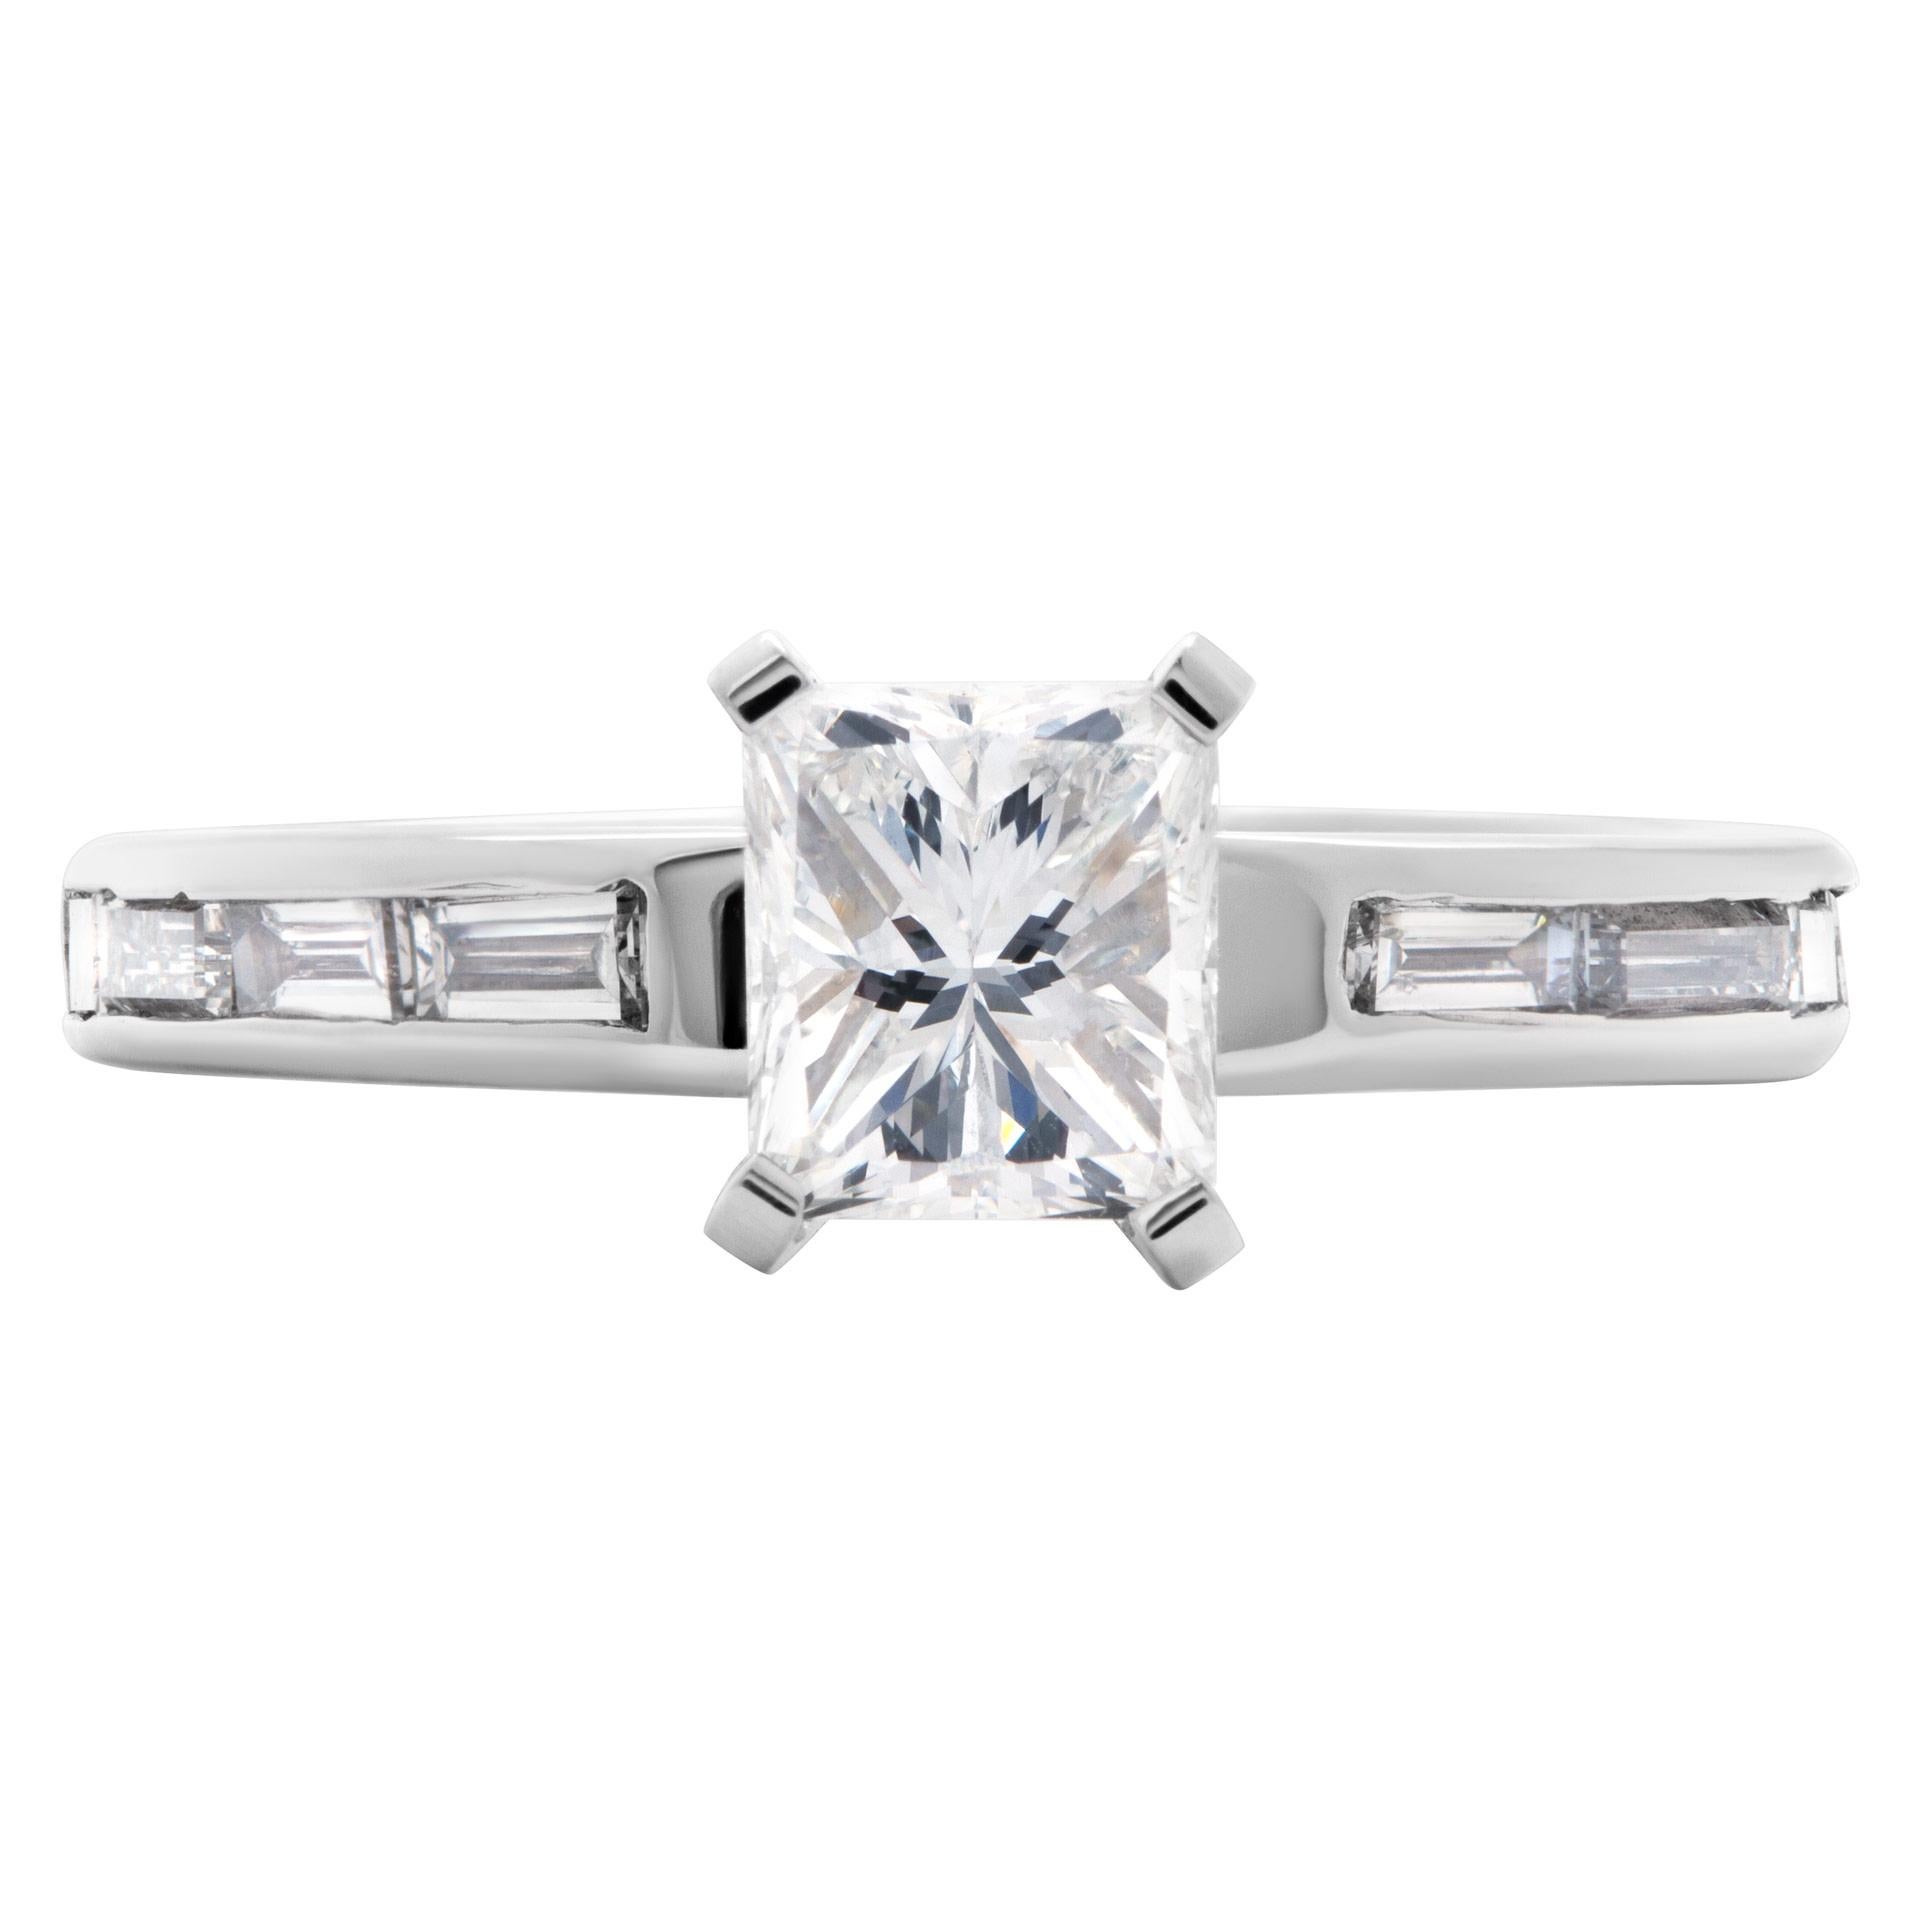 GIA report certified engagement ring cut-cornered rectangular modified brilliant cut diamond 1.01 carat G color, VS1 clarity set in 14k white gold setting with approx. 0.70 carat in side baguettes. Size 5.25 This GIA report certified ring is